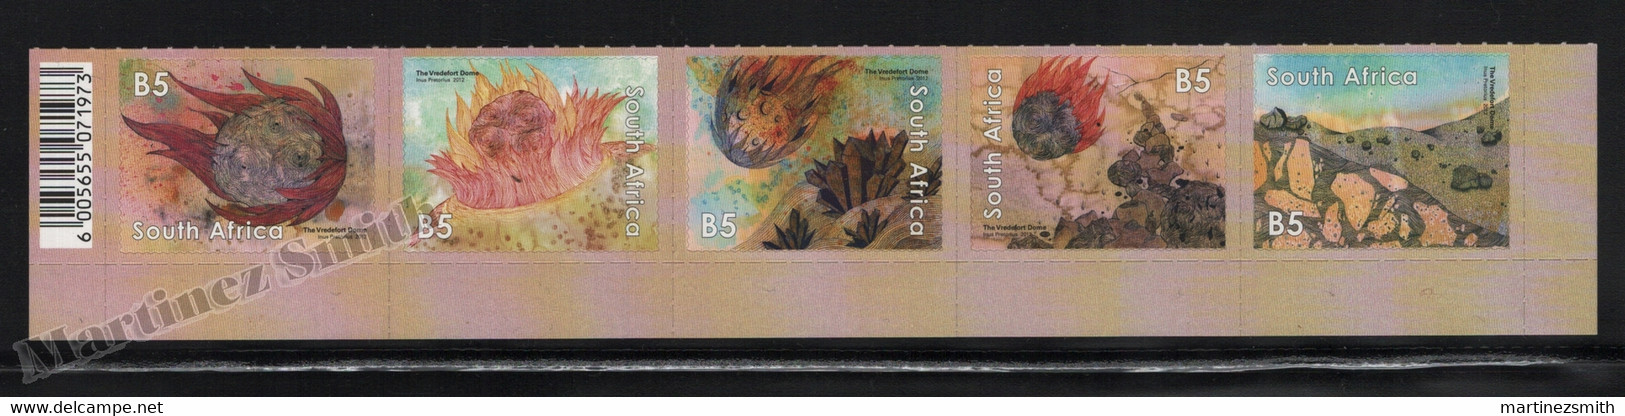 Afrique Du Sud - South Africa 2012 Yvert 1690-94, The Vredefort Dome - Adhesive Full Strip - MNH - Ungebraucht